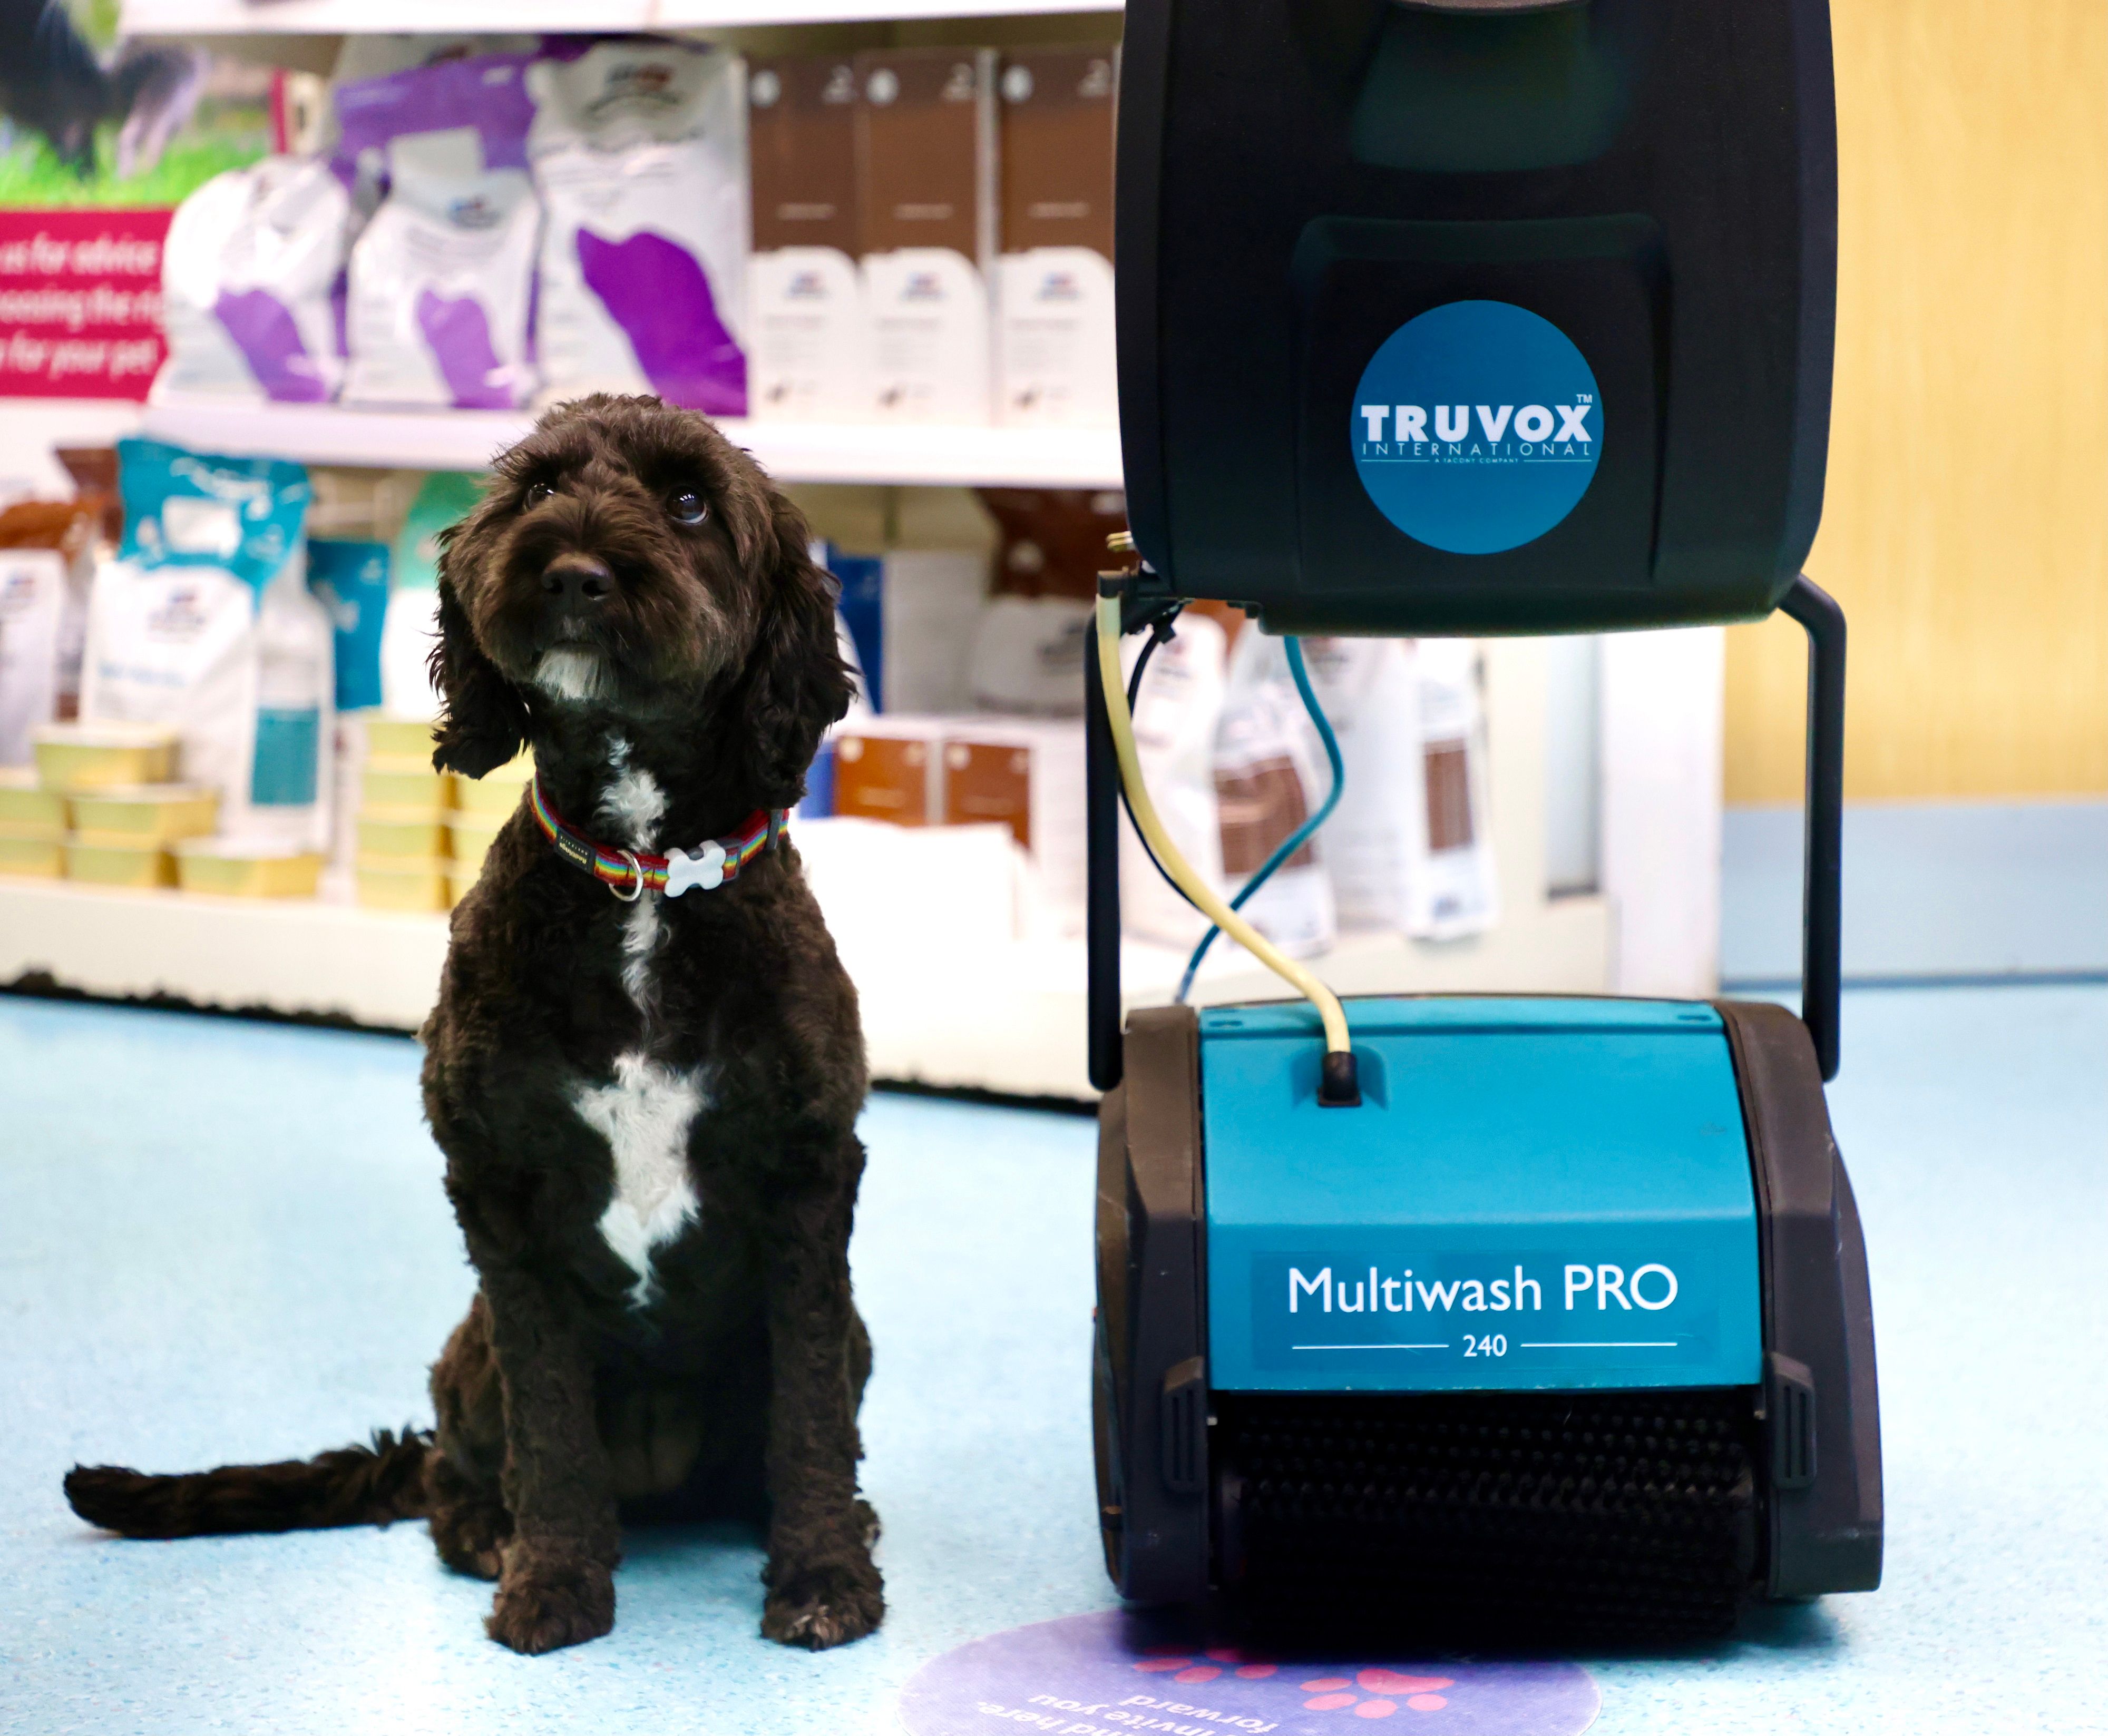 Guaranteeing health and hygiene in a veterinary environment